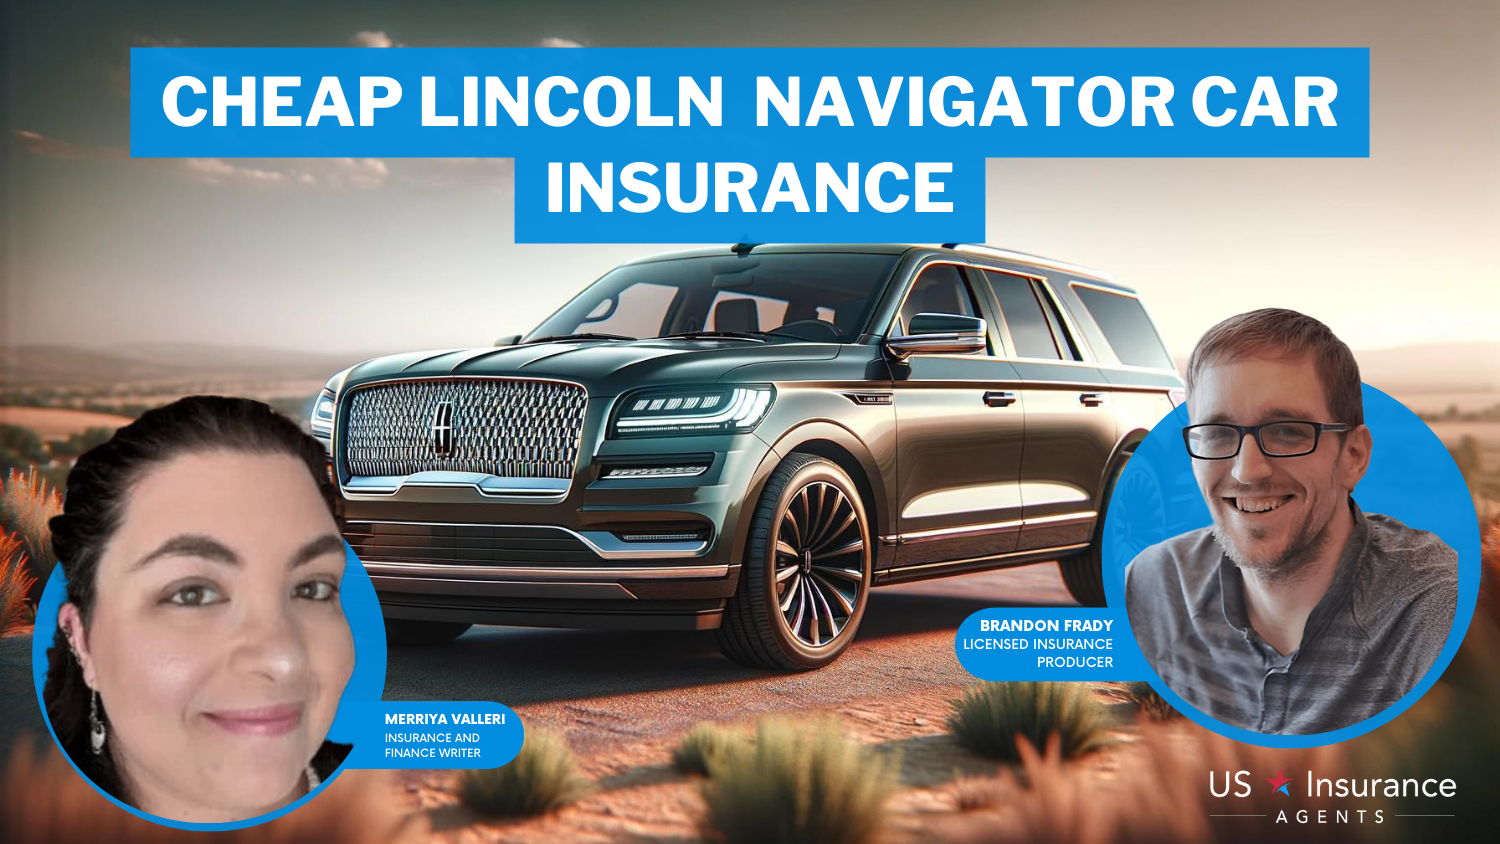 Safeco, Mercury and Auto-Owners: cheap Lincoln Navigator car insurance